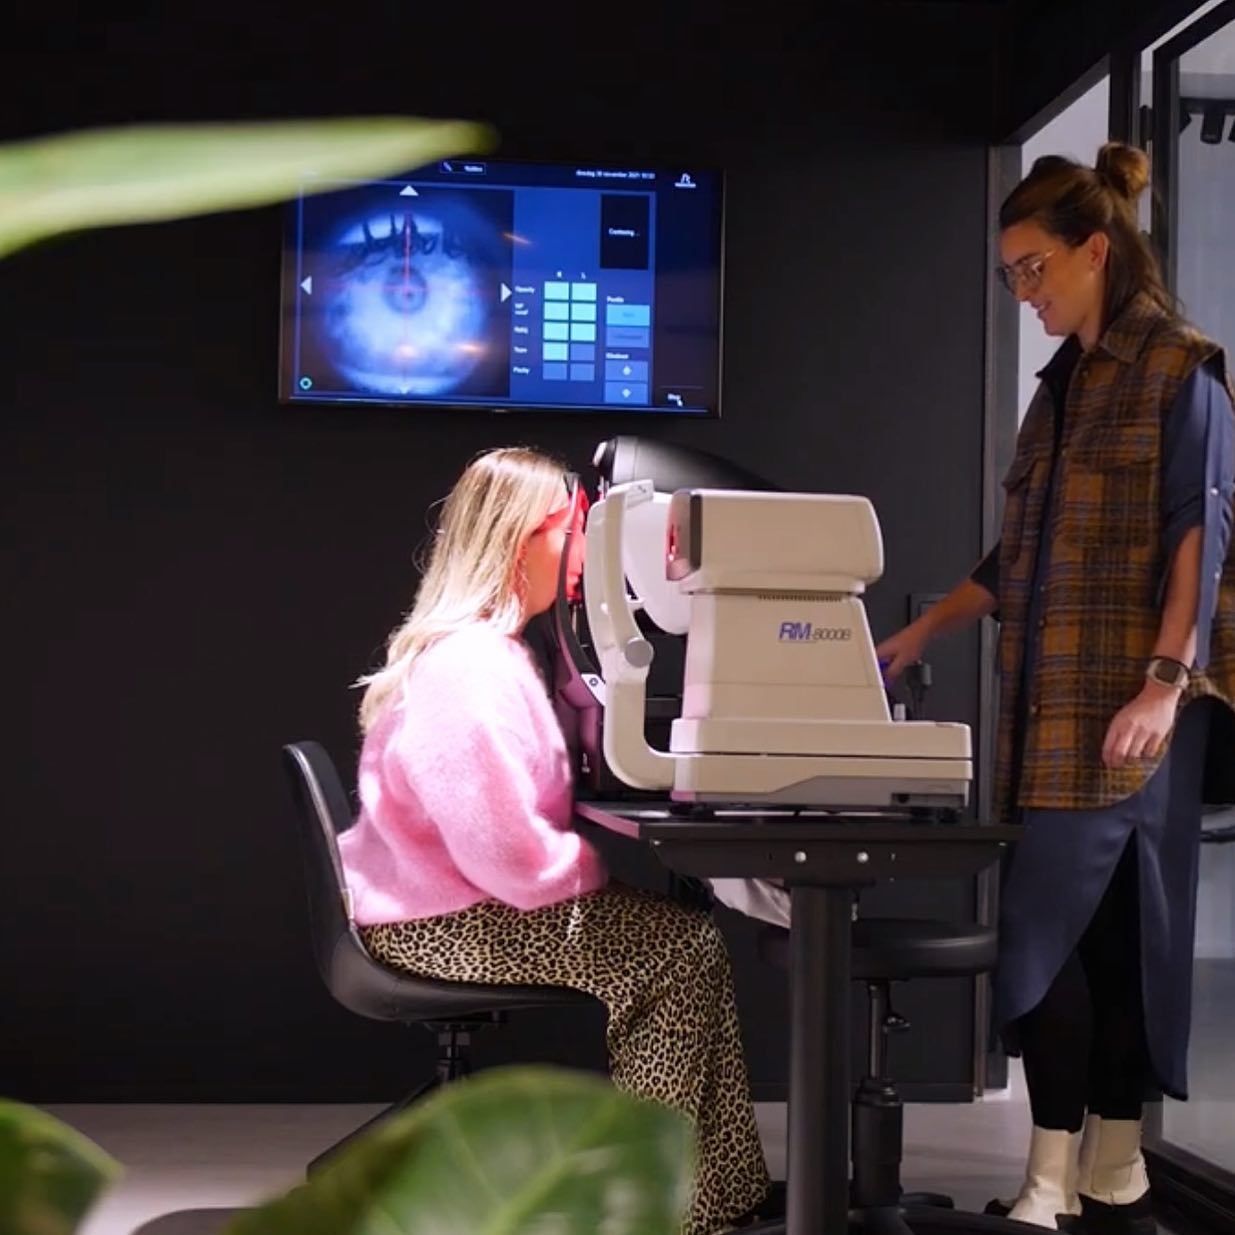 With the high-precision 3D eye measurement of the unique scanner, we measure your eyes more precisely than ever before! 👀🤓 #rodenstock #sharpvision #free #scan #visitus ❤️